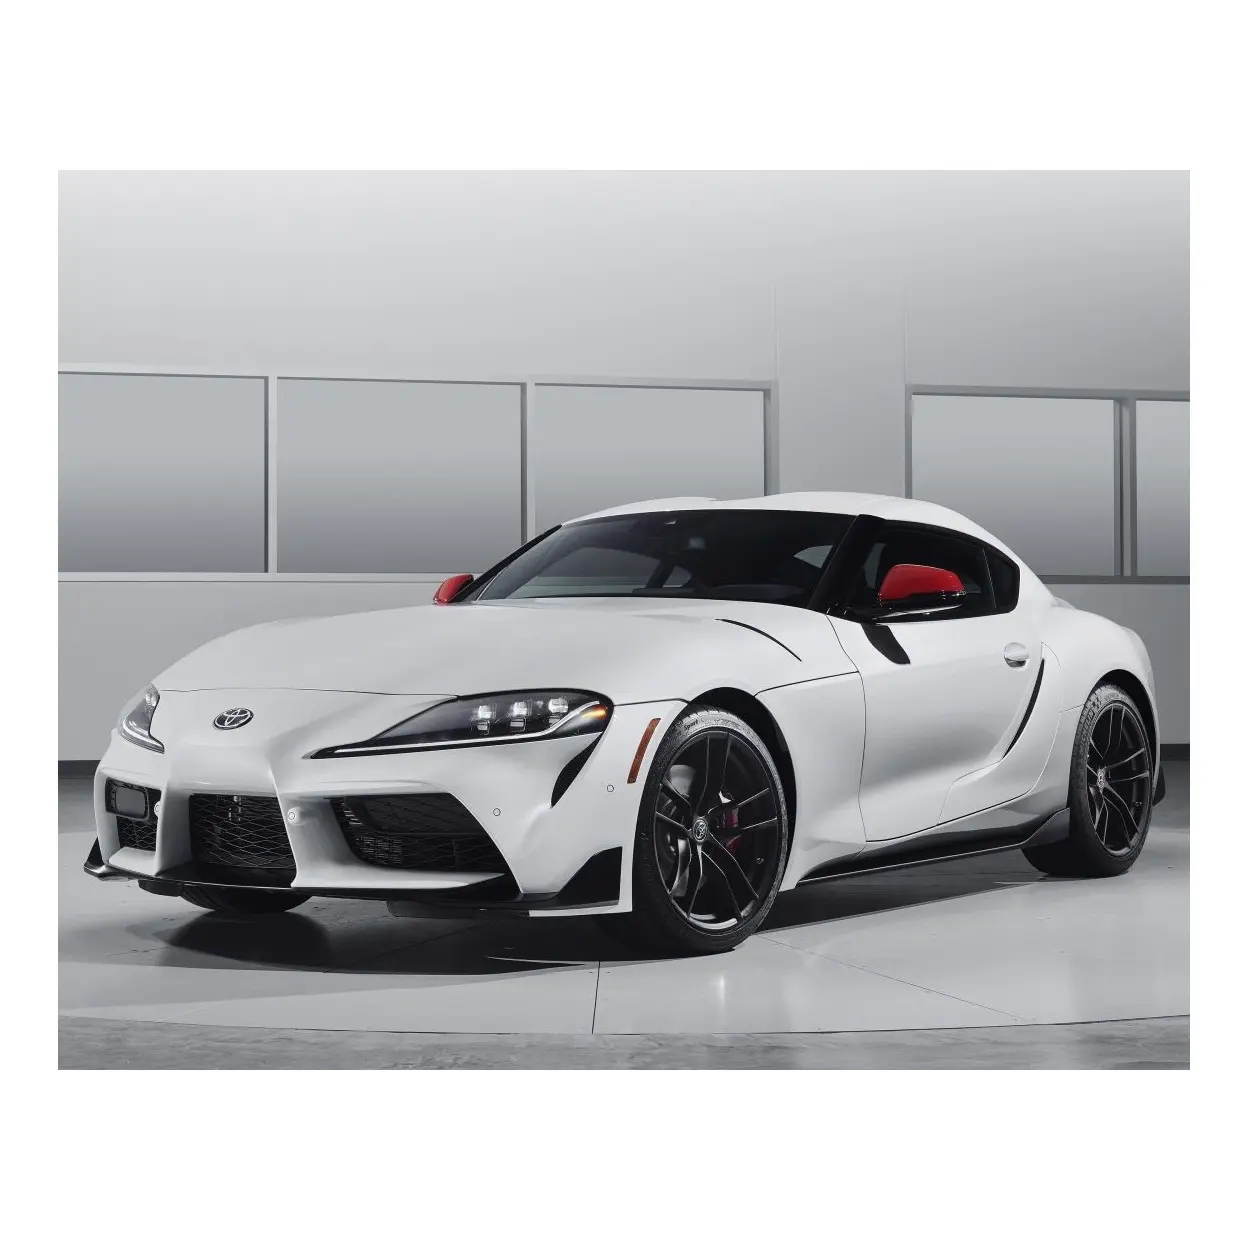 Used Toyota Supra A90 Cars 2018-2023 Good condition Manual / Auto Transmission Used Cars Corolla Used Toyota Cars for sale